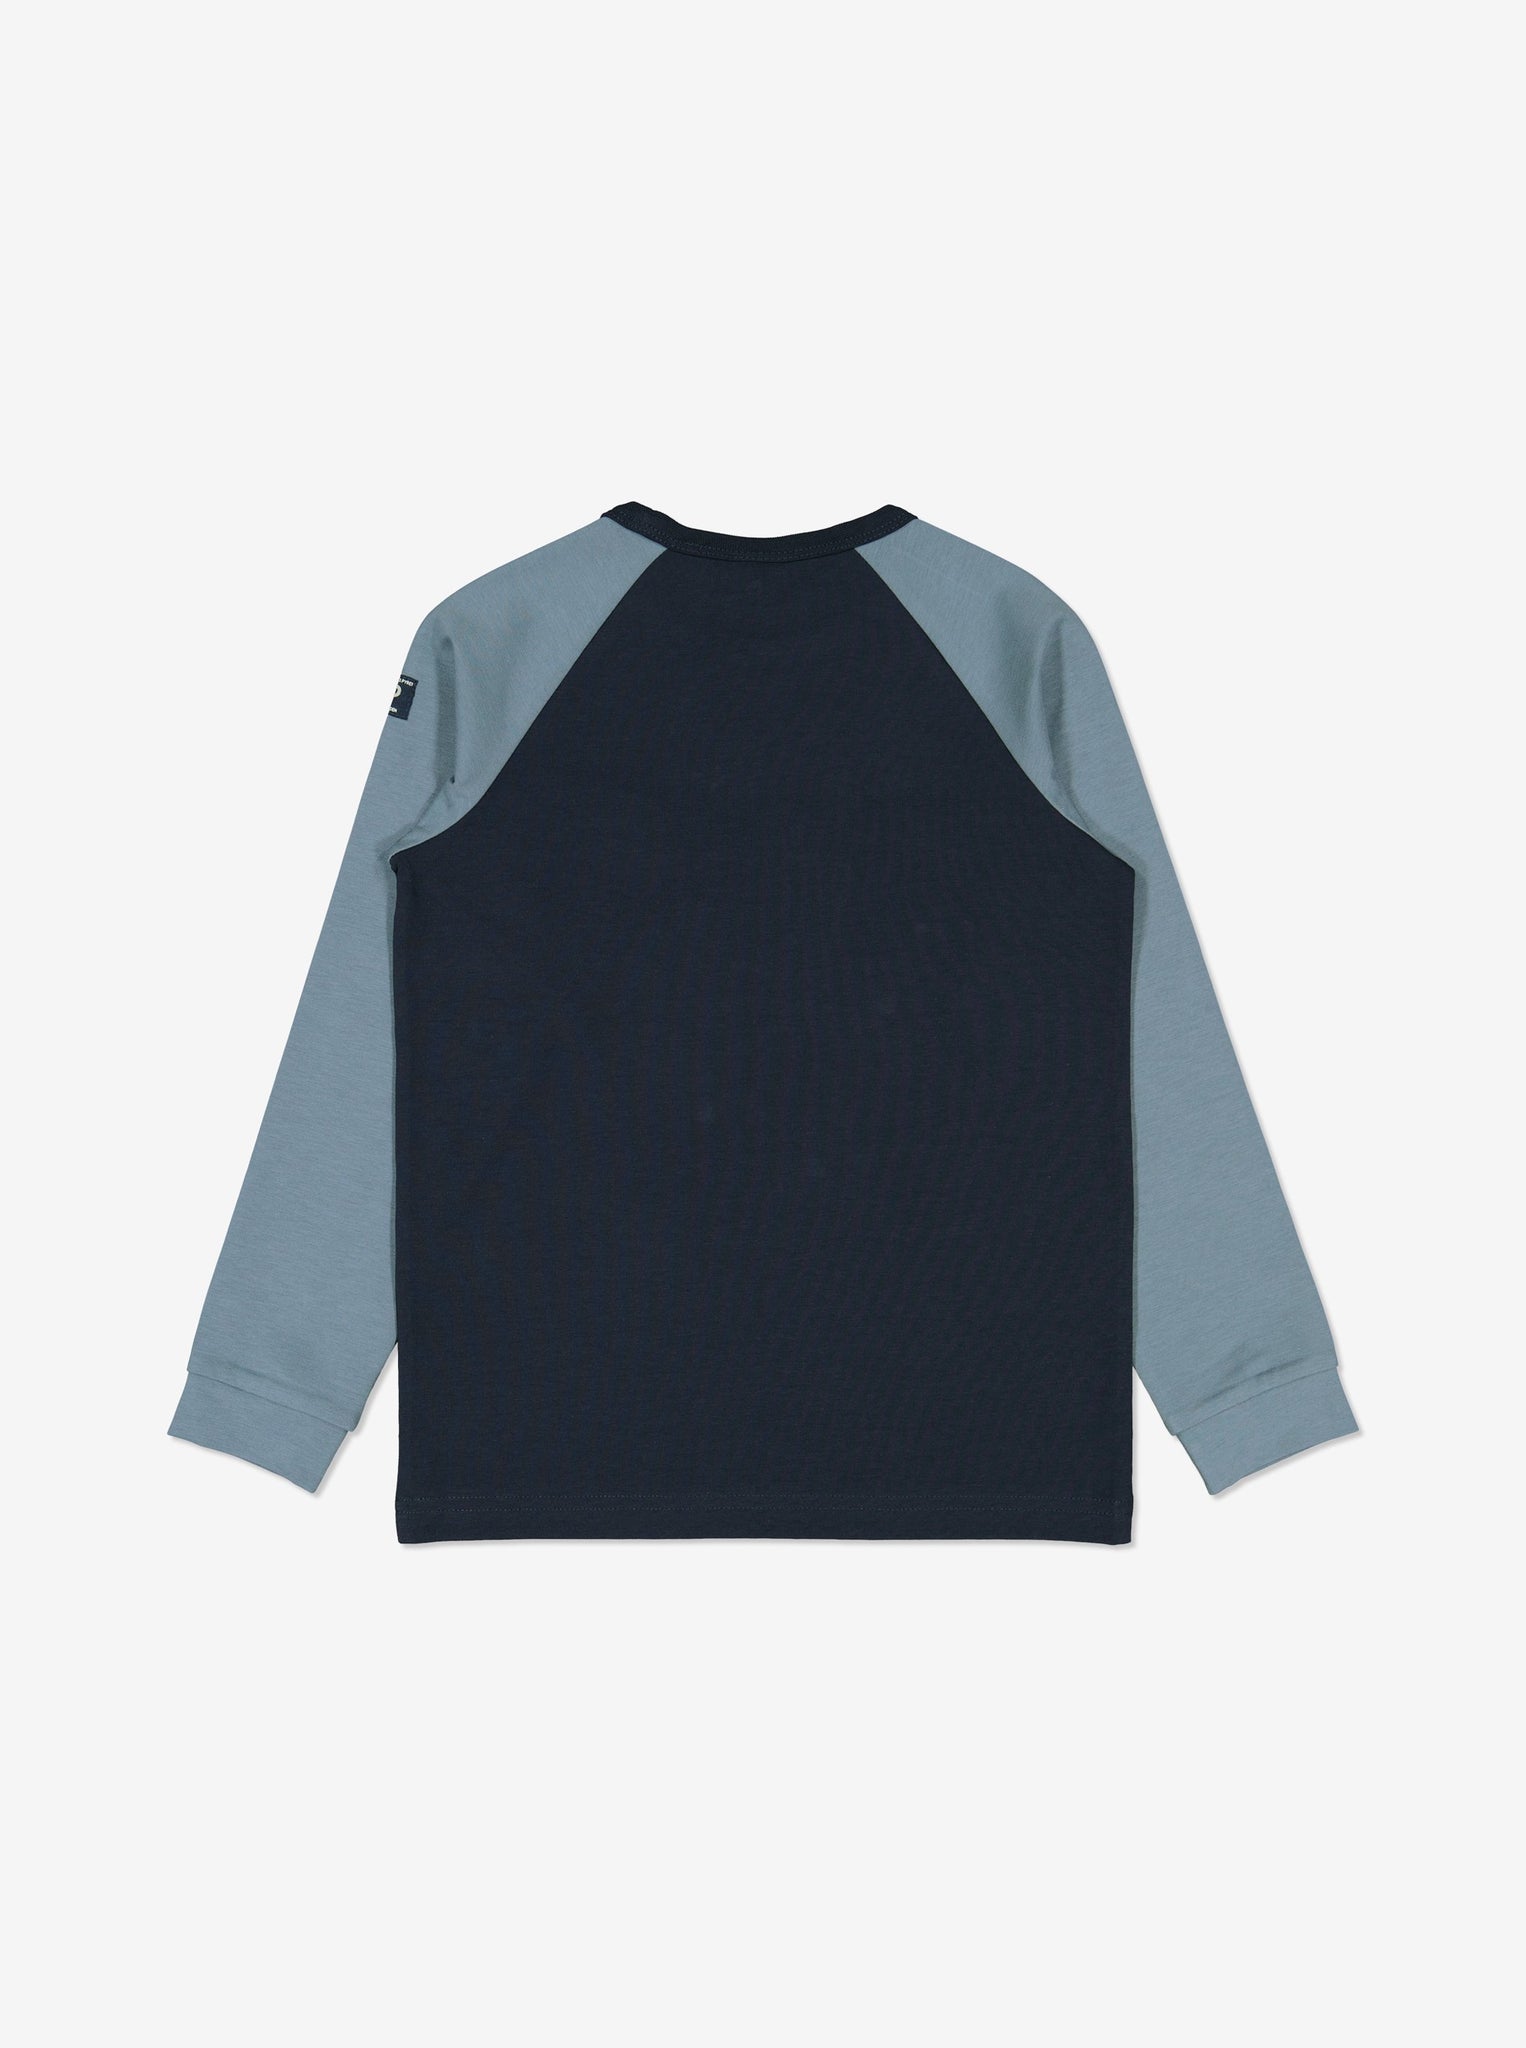  Organic Navy Police Kids Top from Polarn O. Pyret Kidswear. Made from environmentally friendly materials.